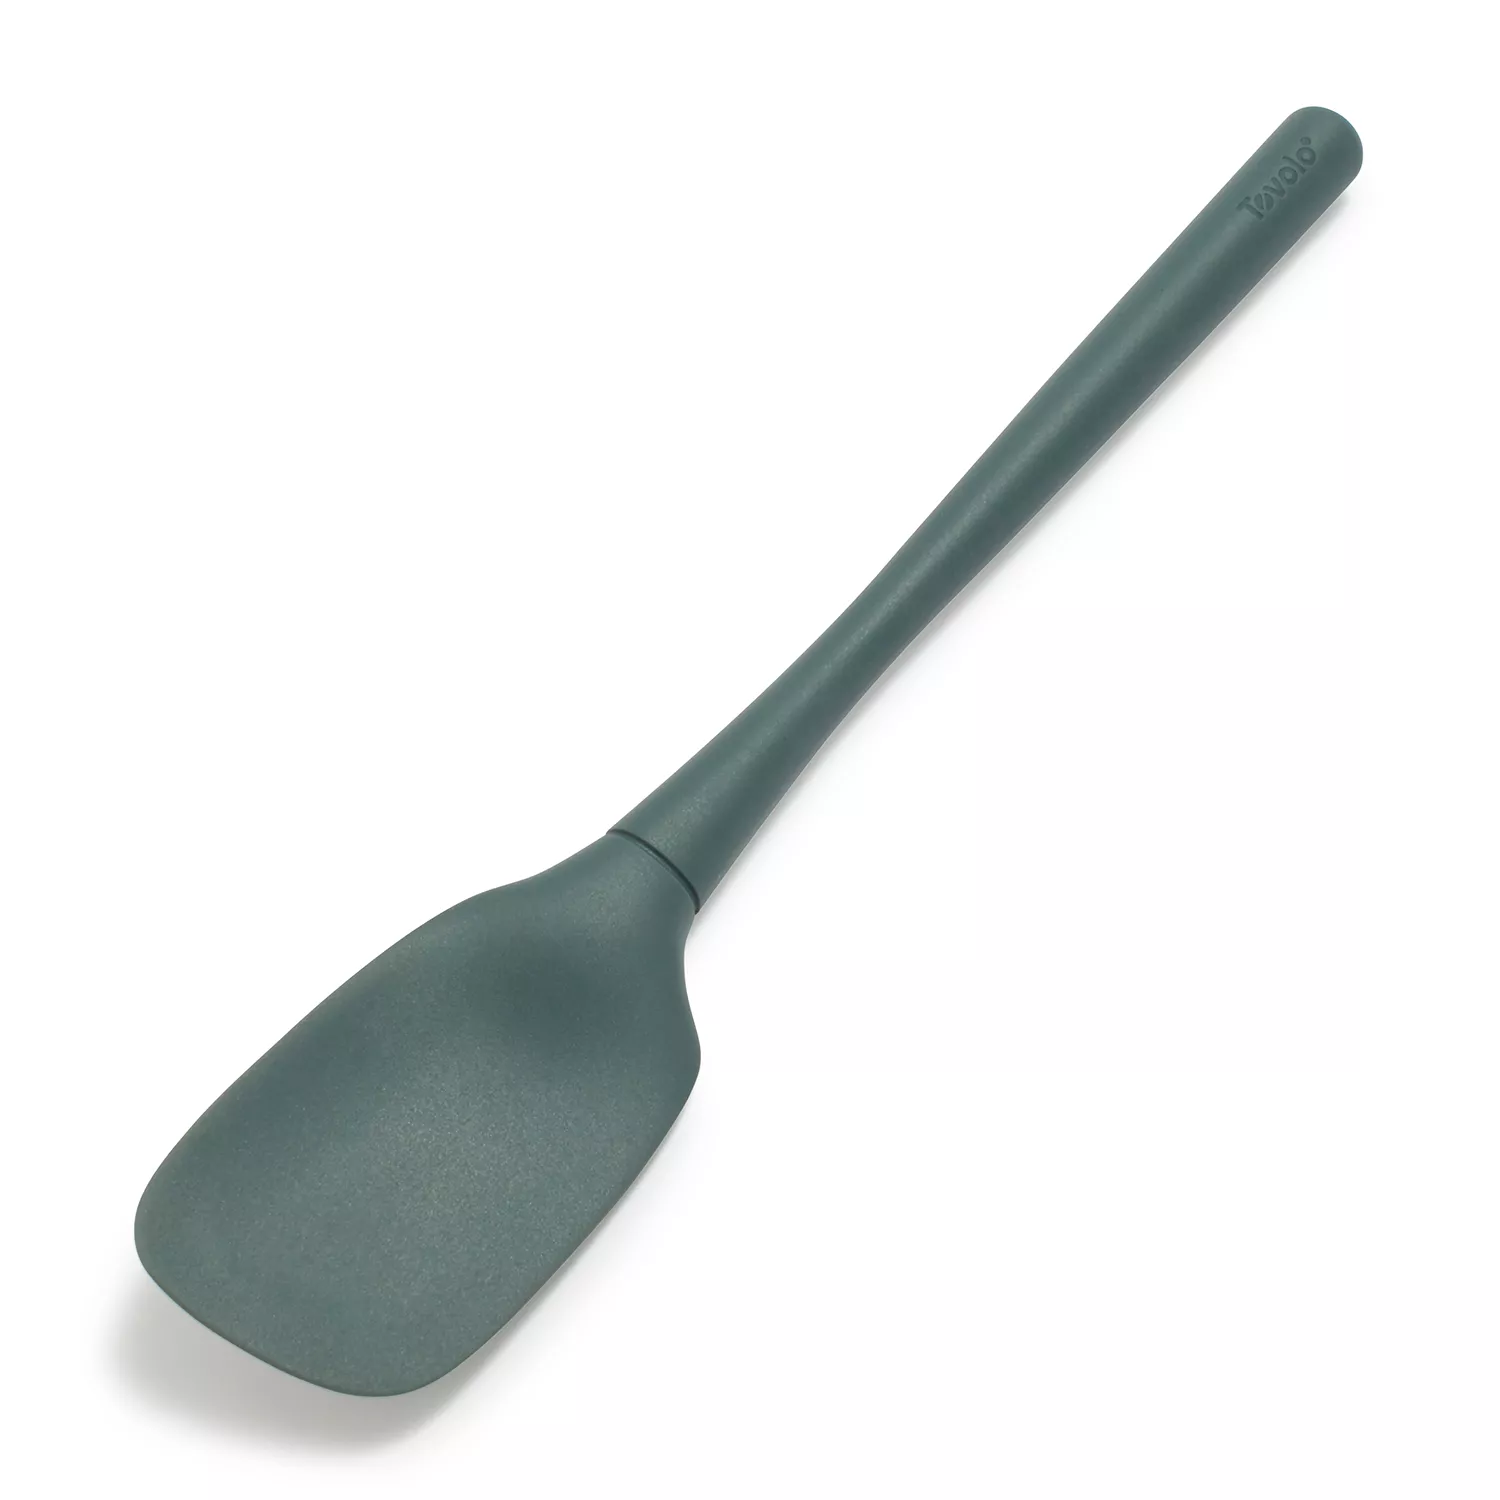 Tovolo SS Silicone Mixing Spoon - Charcoal - Spoons N Spice